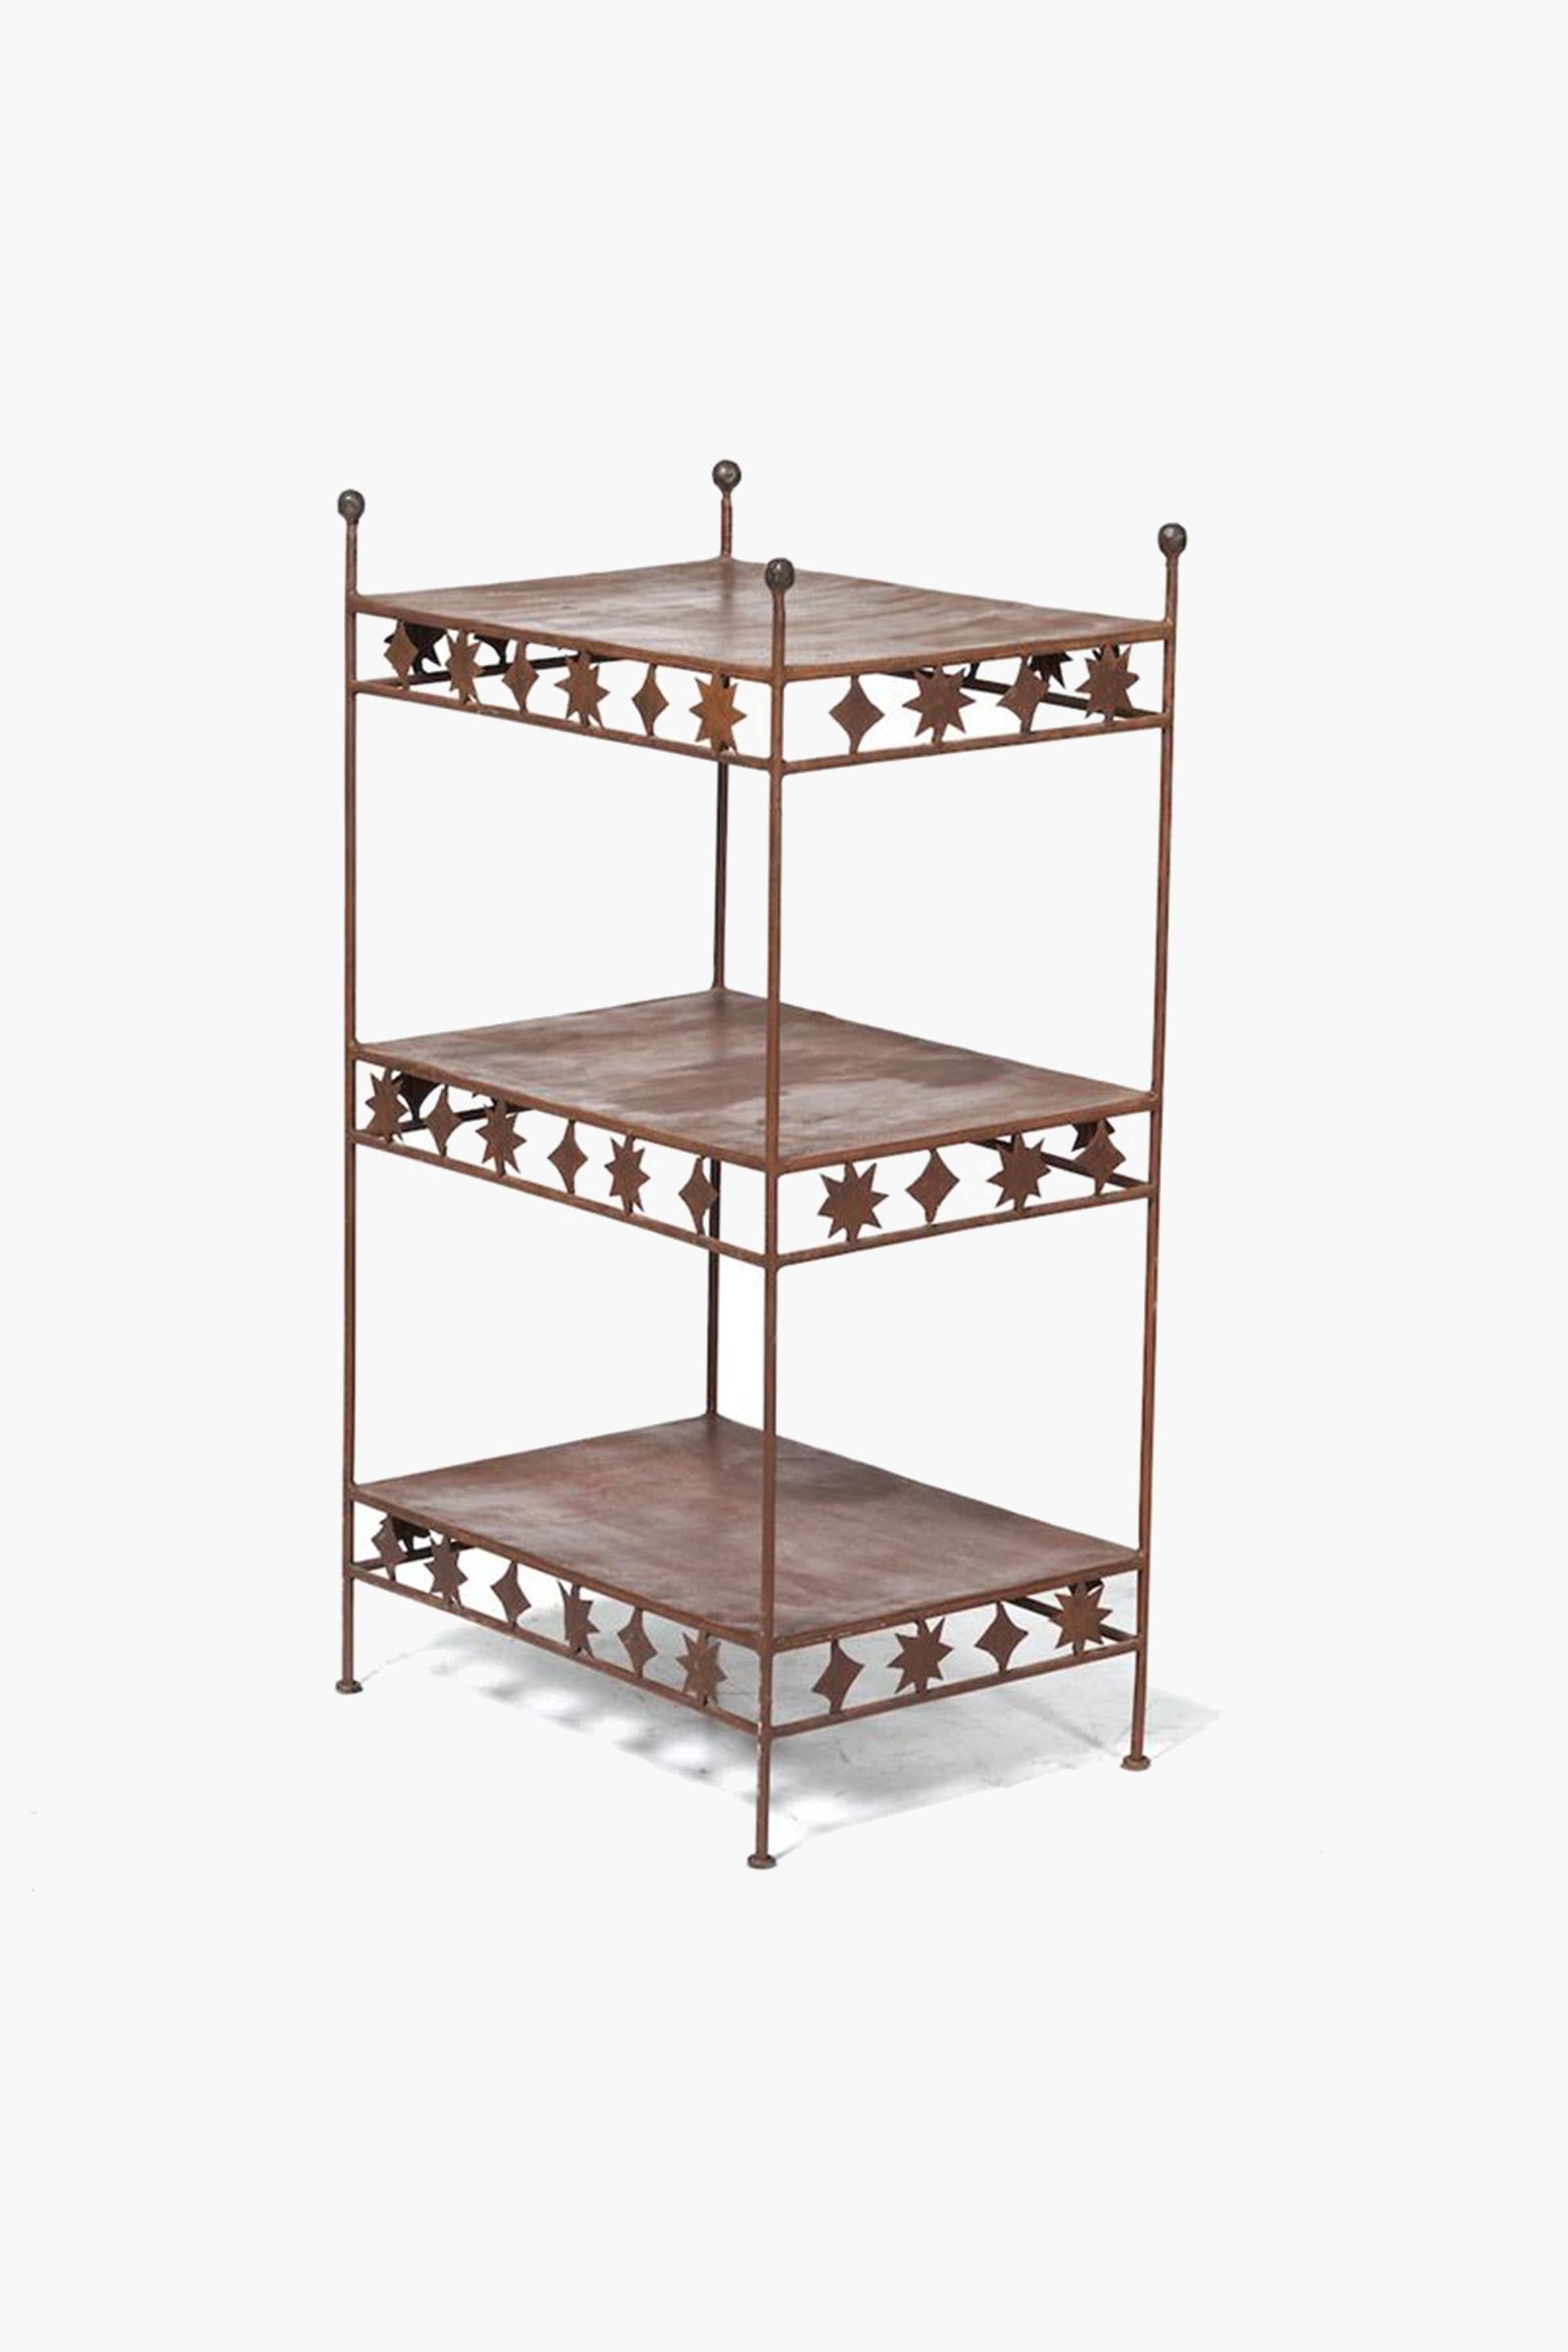 Matisse' Wrought Iron Etagere, 1960s

Patinated wrought iron etagere with whimsical Matisse style cut-out decoration supporting each tier.

1960s, France.

Condition: Patinated to a brown bronze color with age.